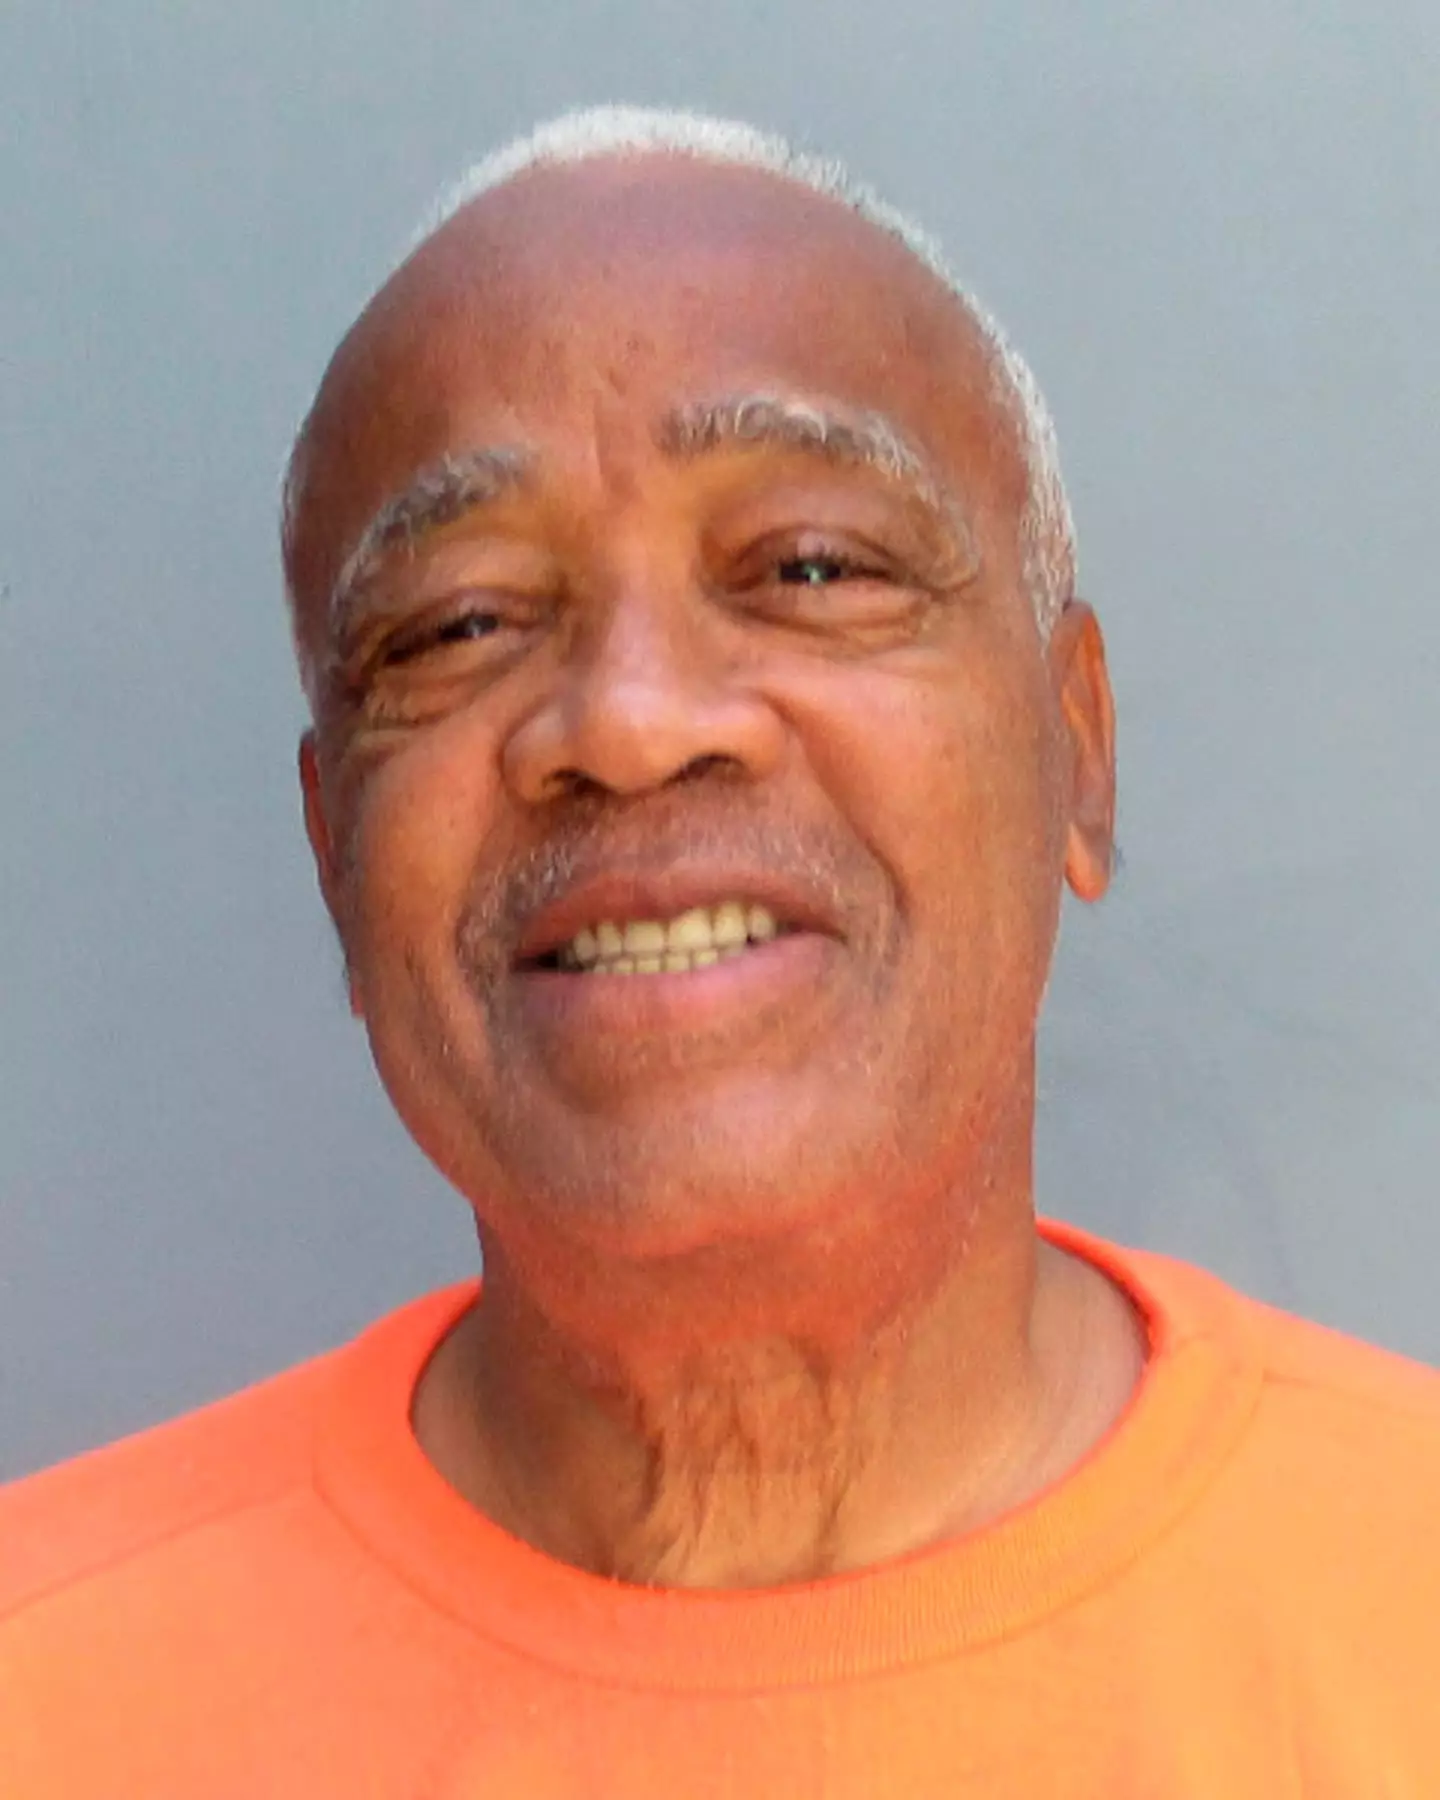 Murray Hooper died as a result of the death penalty in Florence, Arizona today.